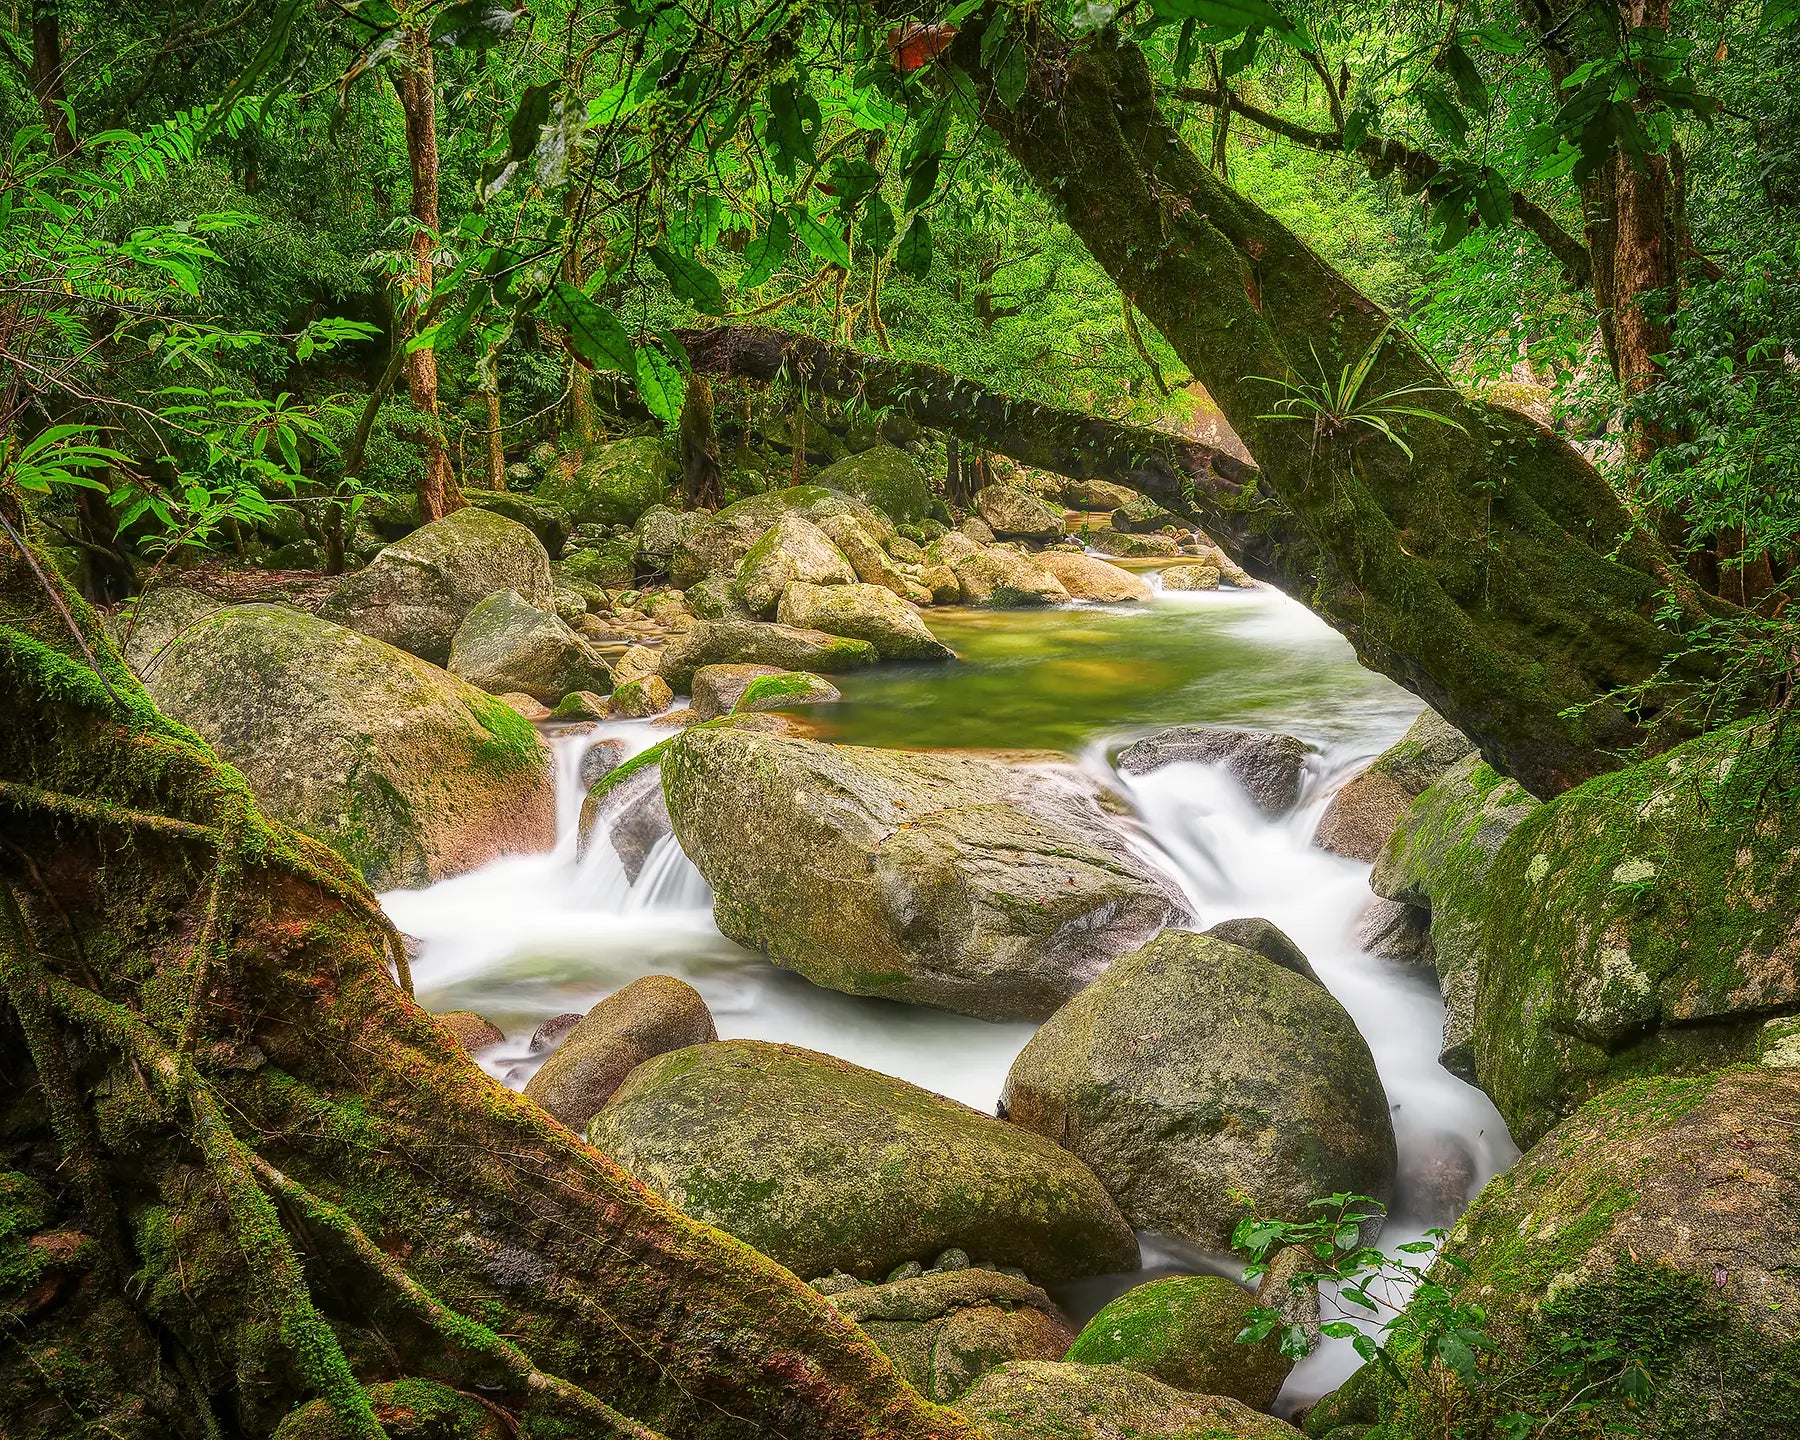 Relaxed. Trees and flowing water, Daintree rainforest, Queensland, Australia.